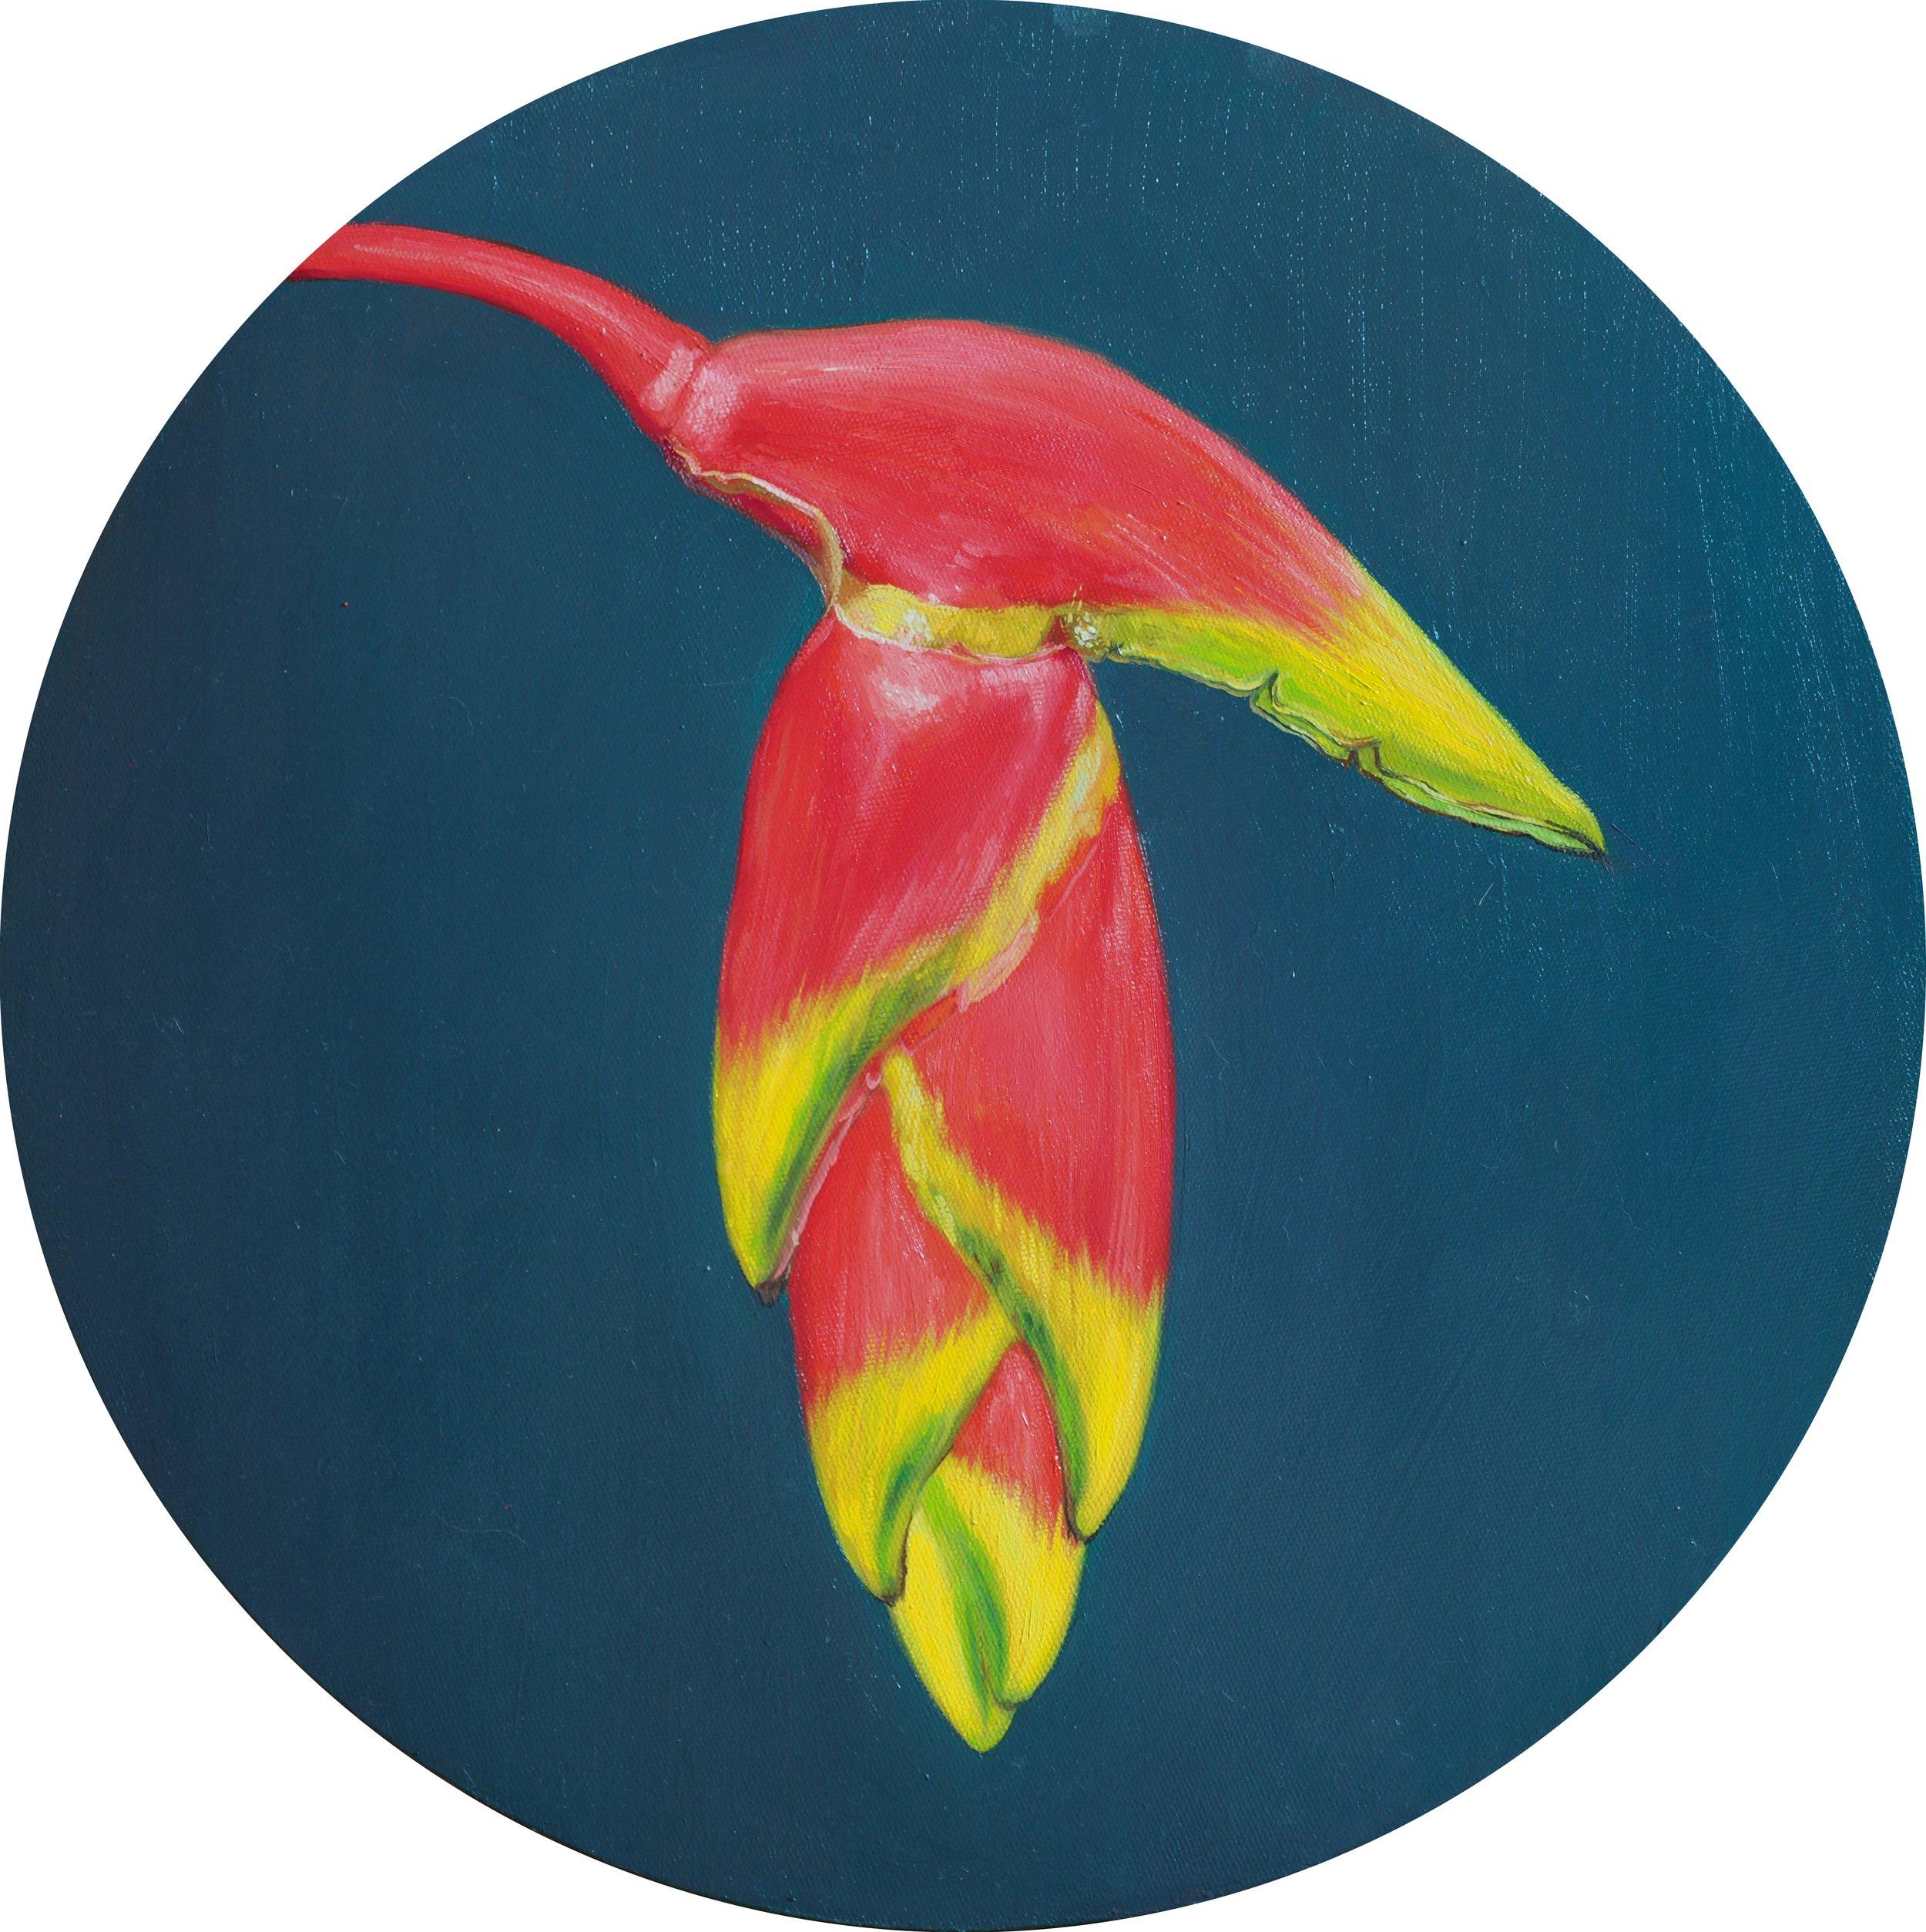 "Heliconia" Oil Painting D 20" inch by Sasha Sokolova

Bio 
Born in Moscow into a family of artists, Sasha Sokolova is an award winning contemporary realist painter, working across a range of traditional oil and water colour techniques.  Her current